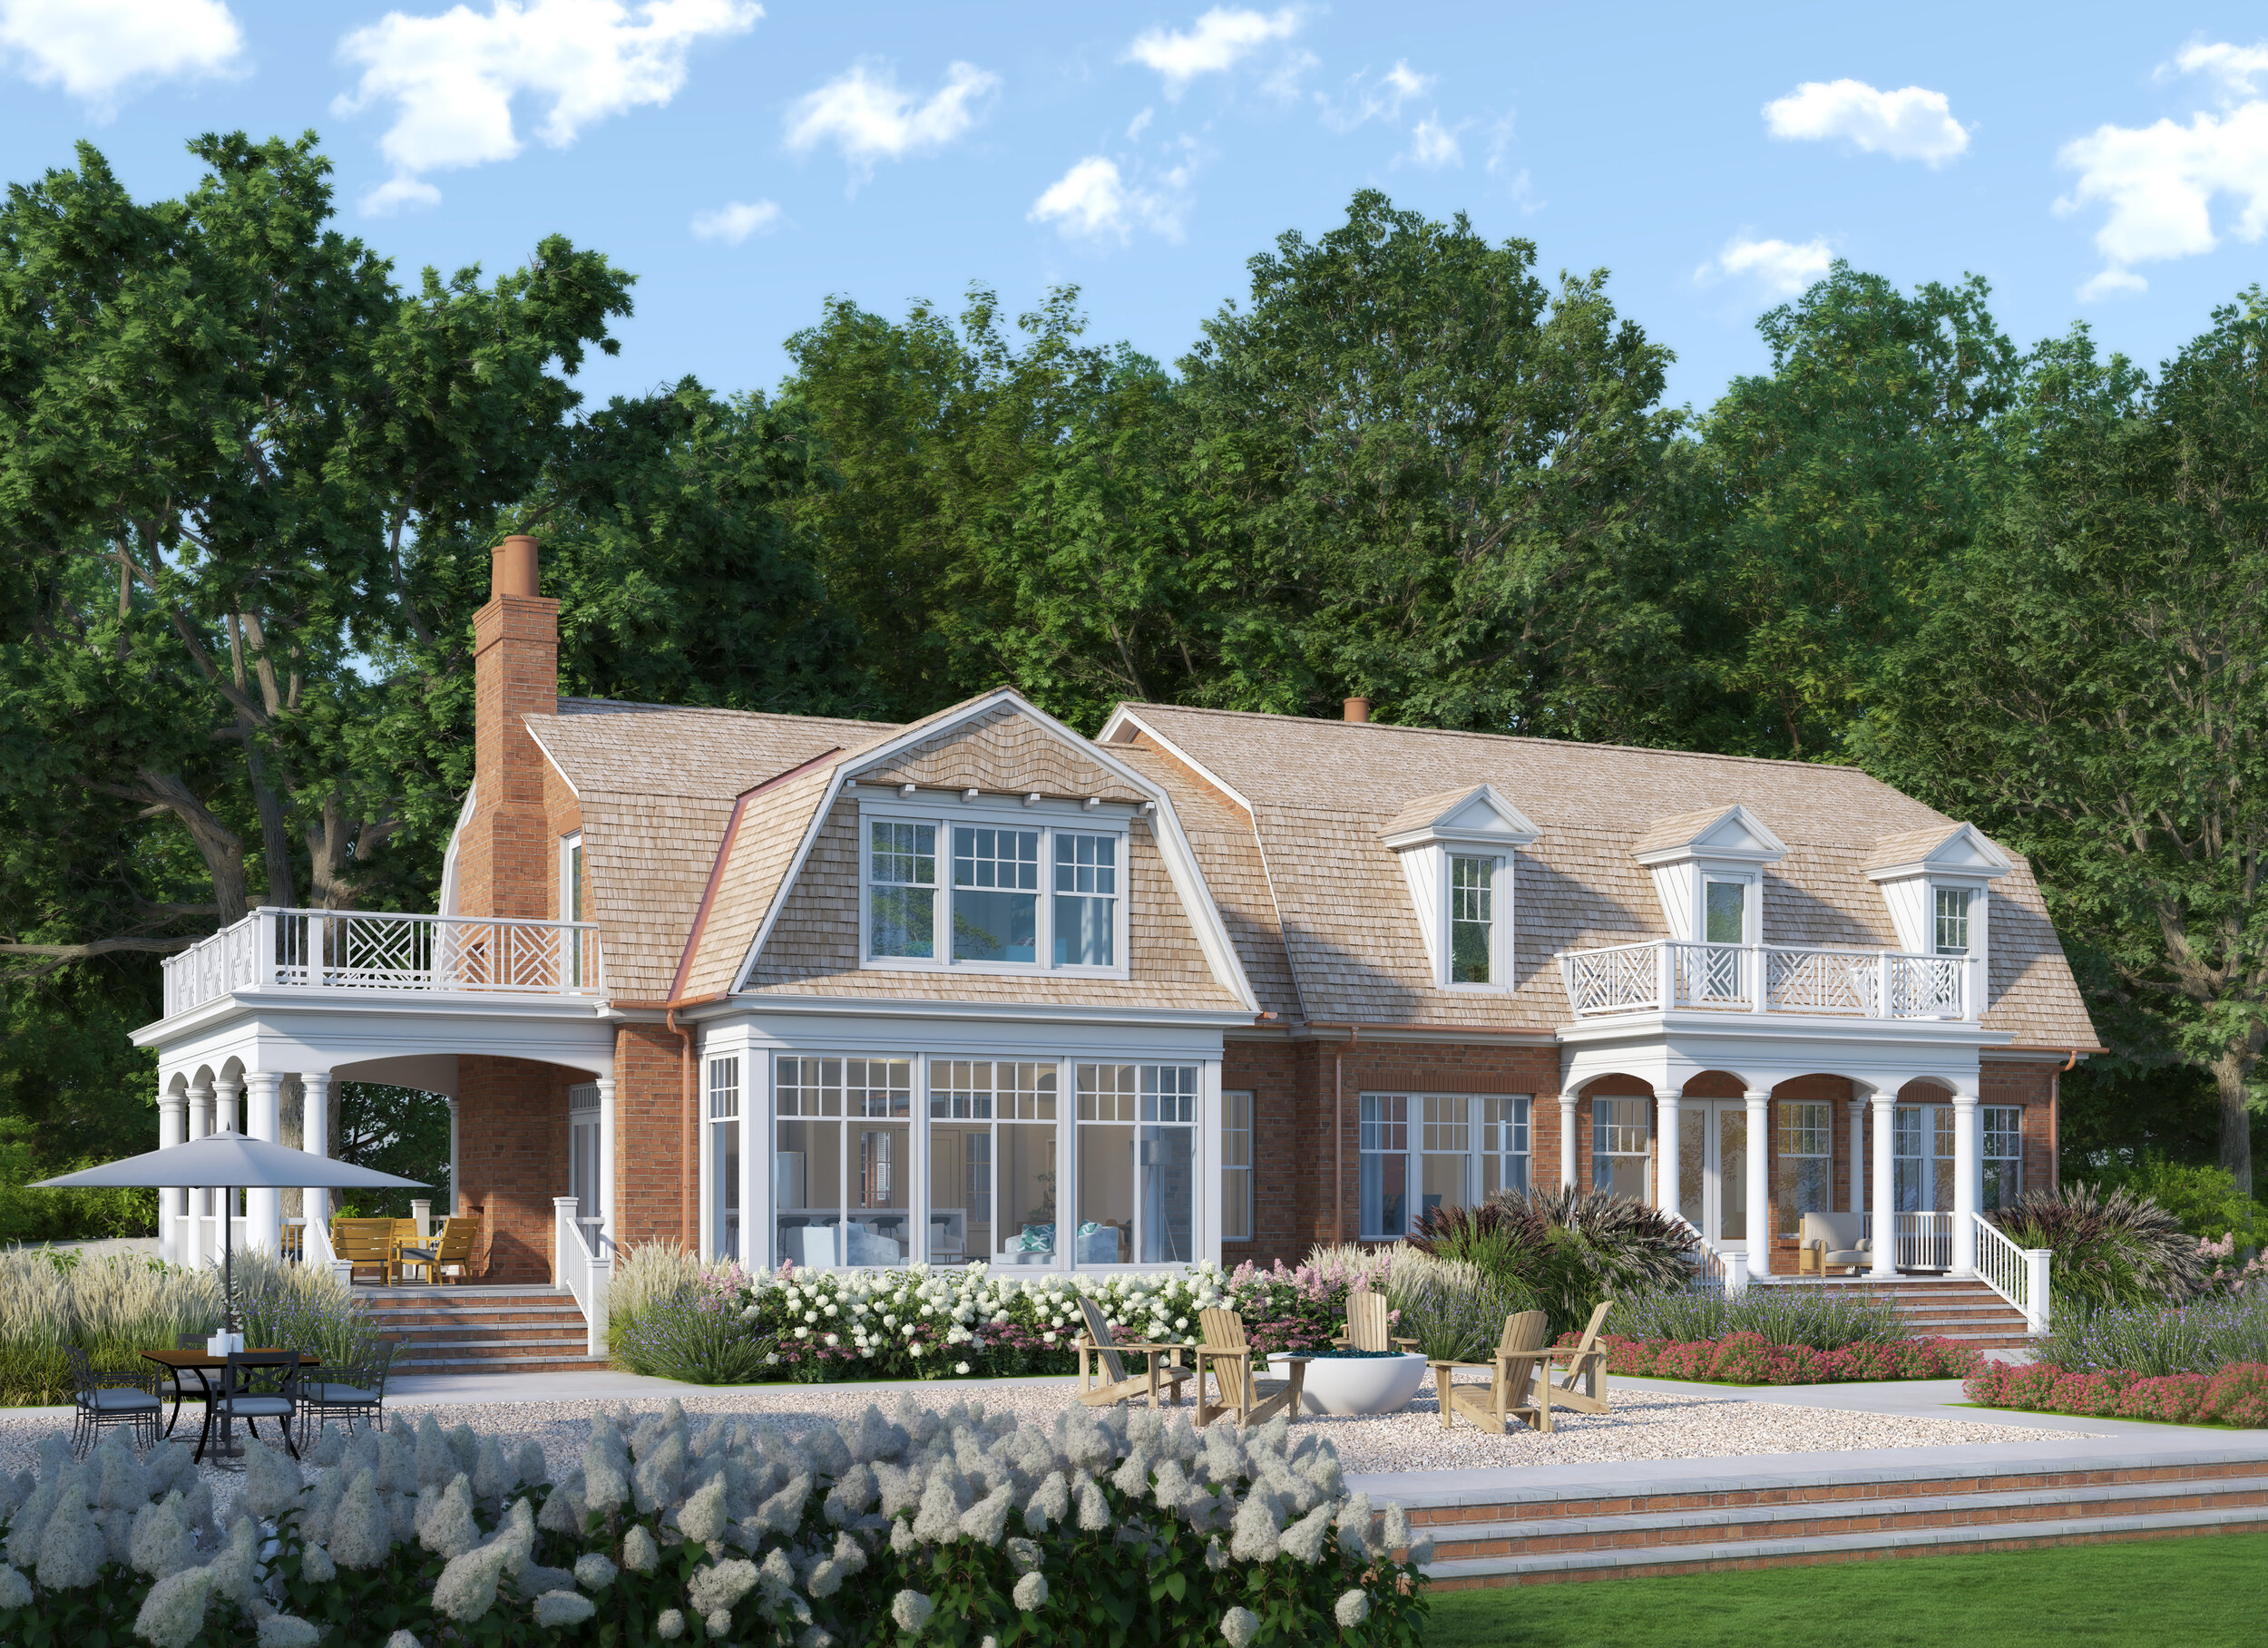 ANNAPOLIS WATERFRONT HOME